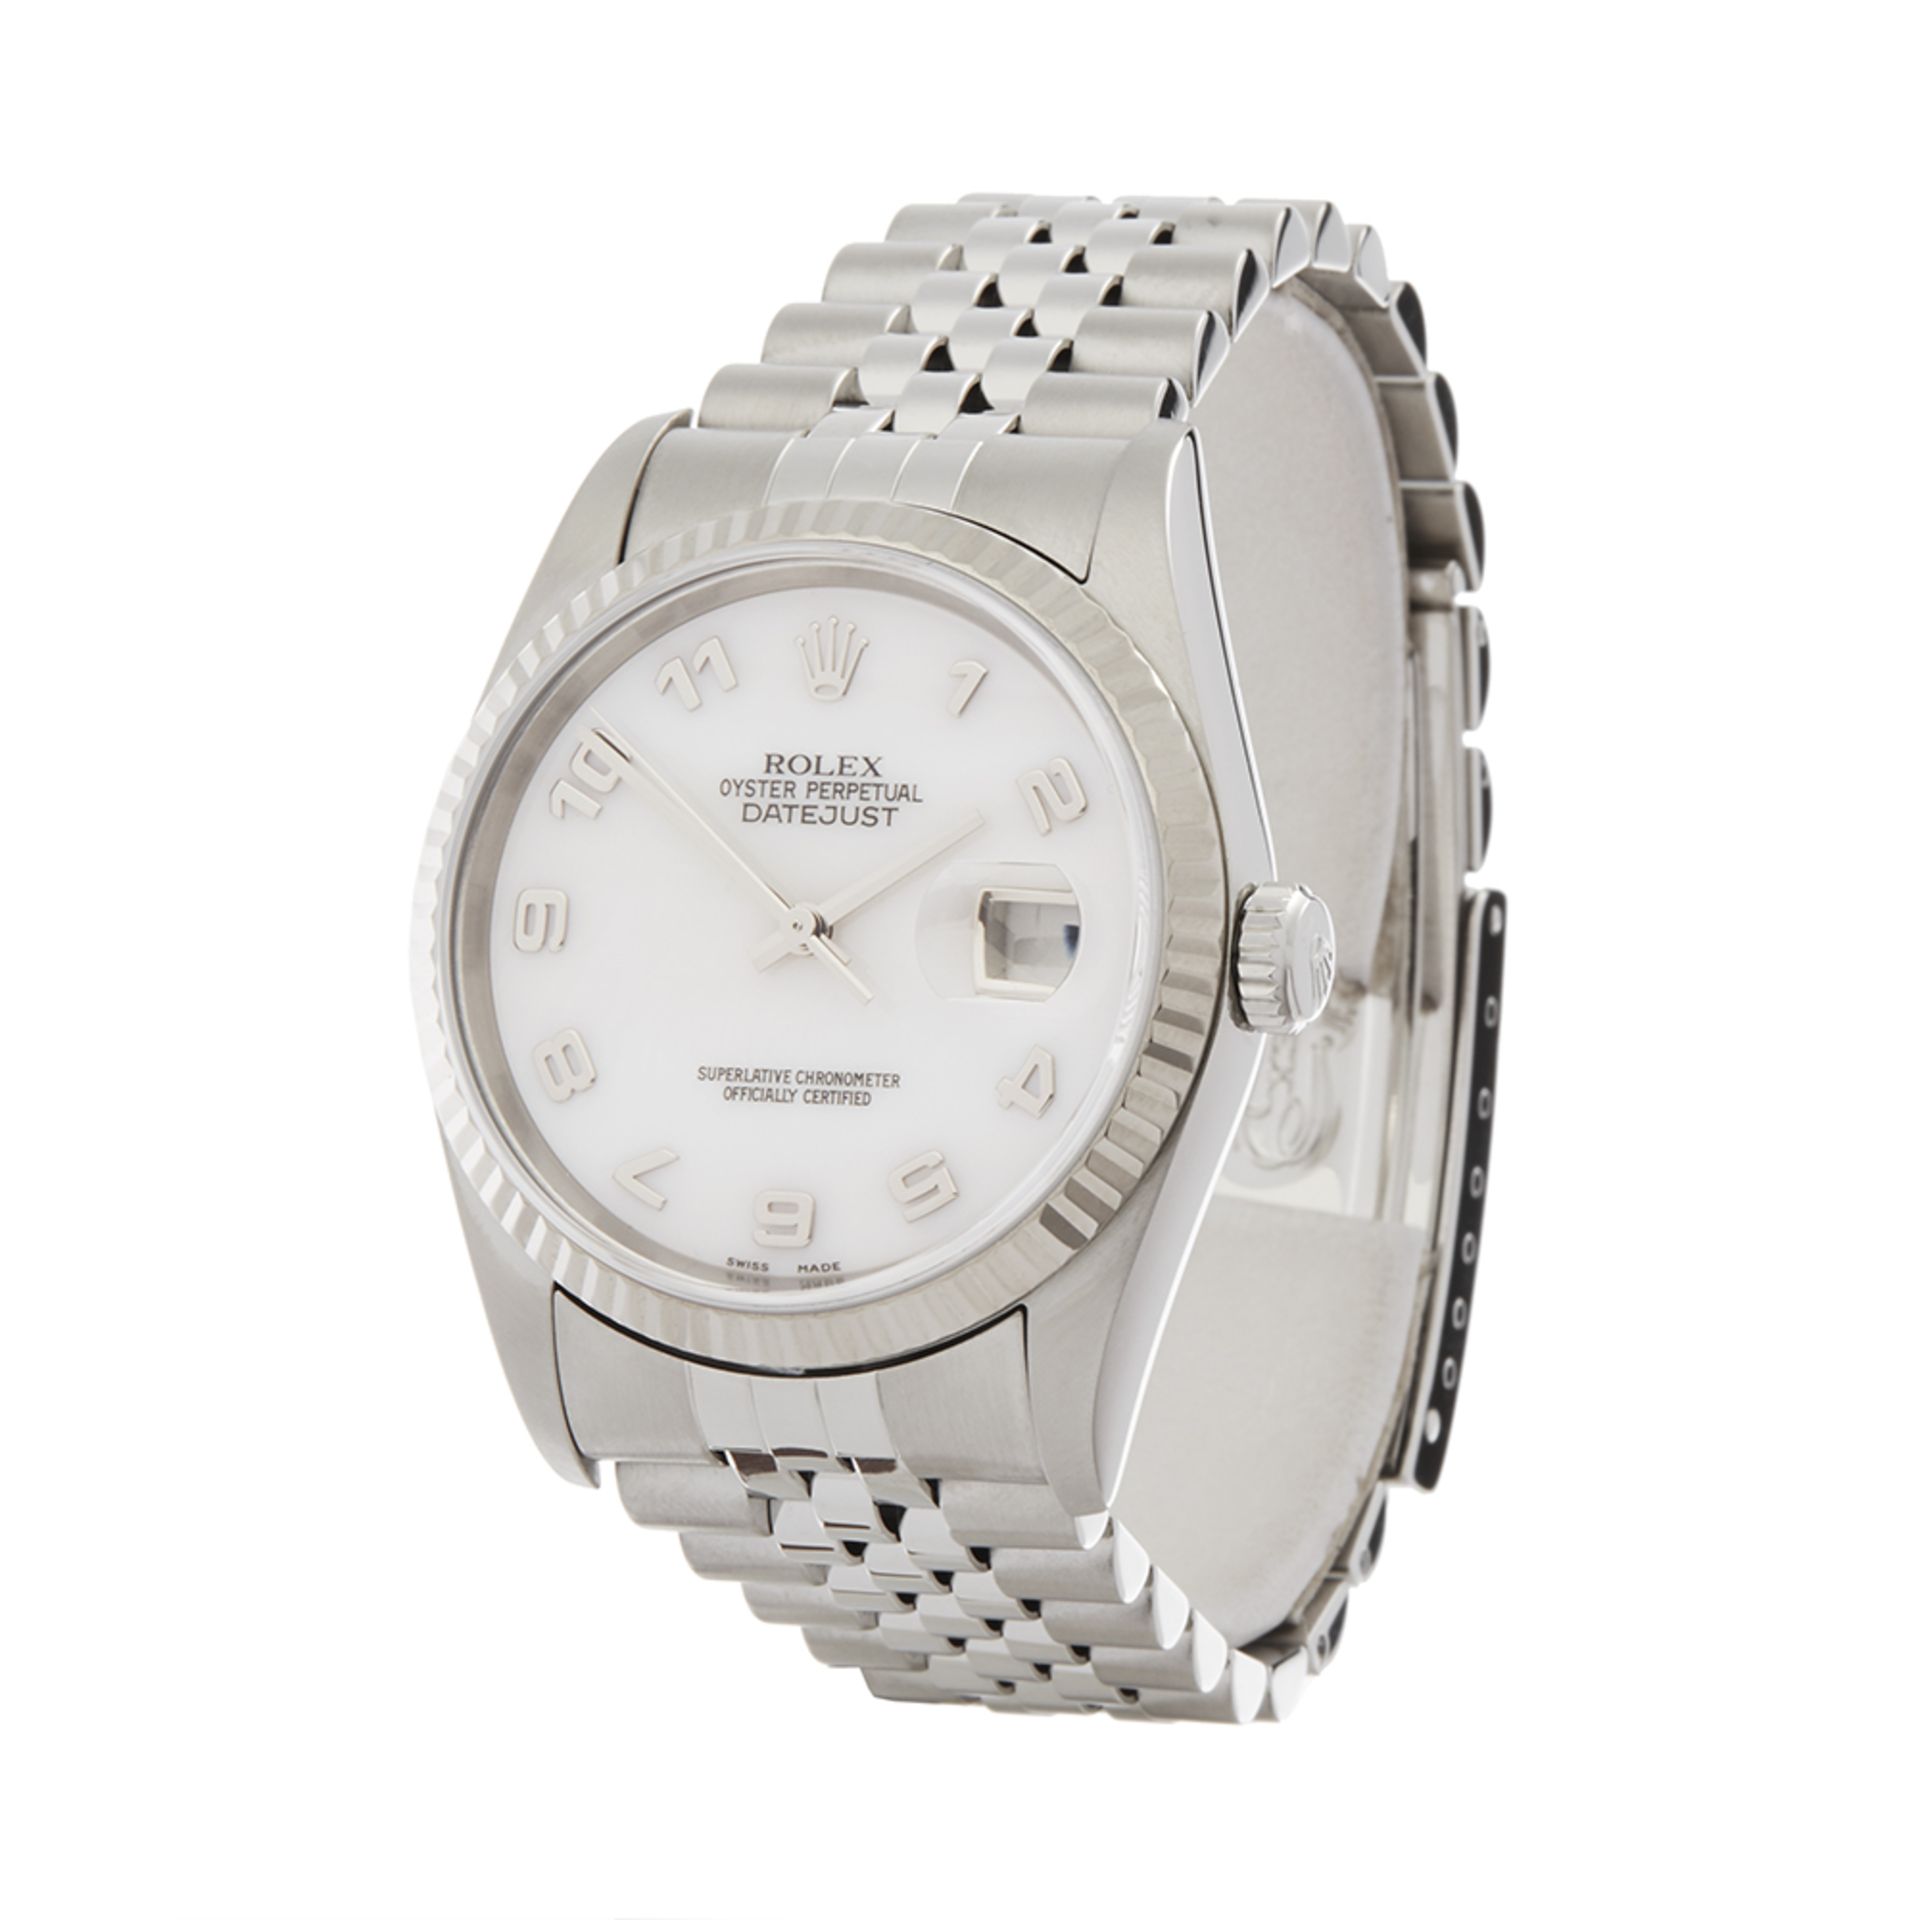 2005 Rolex DateJust 36 Mother of Pearl 18k Stainless Steel & White Gold - 16234